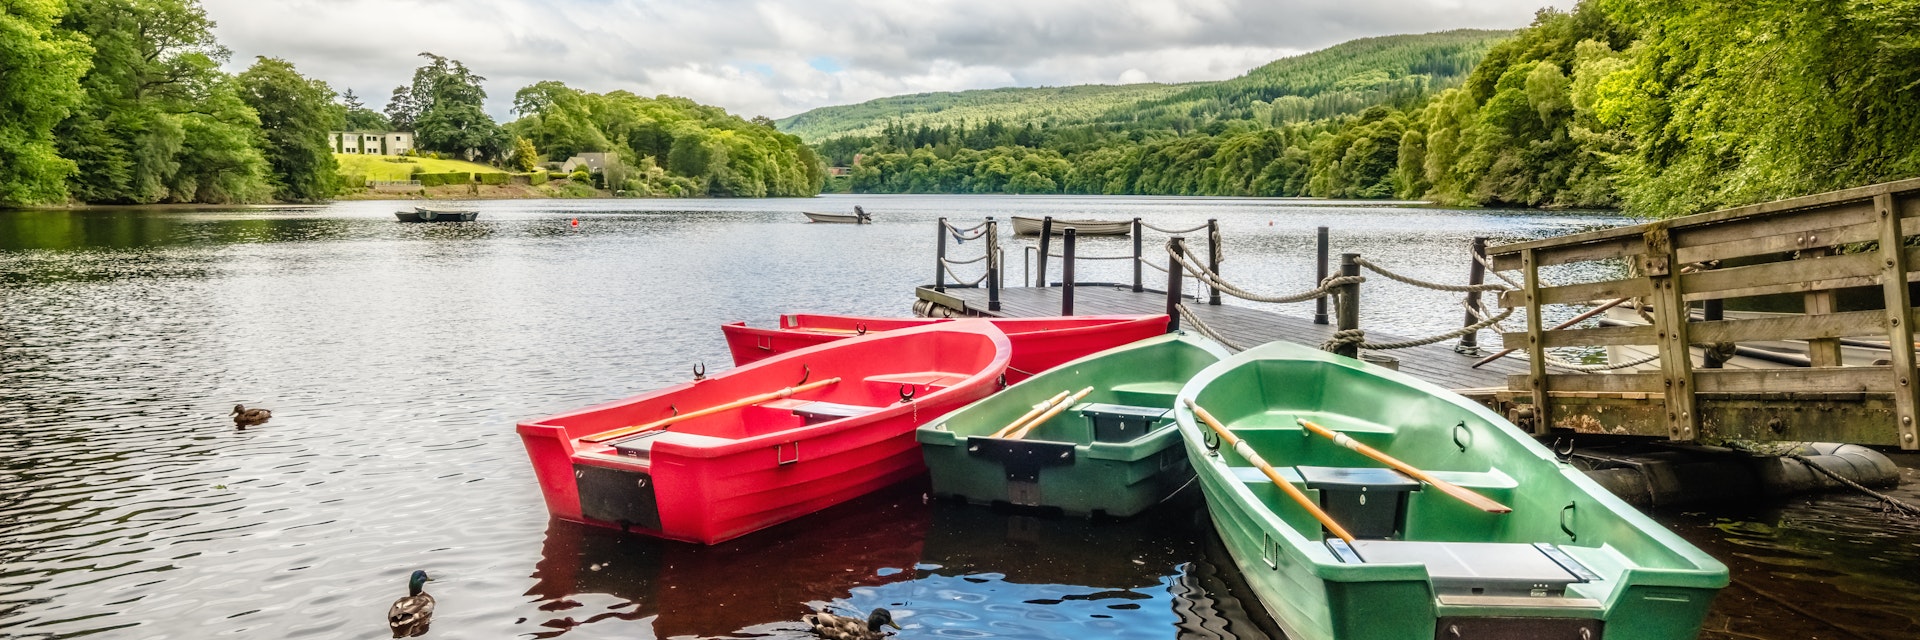 Rowing boats on Loch Faskally at Pitlochry, Scotland.